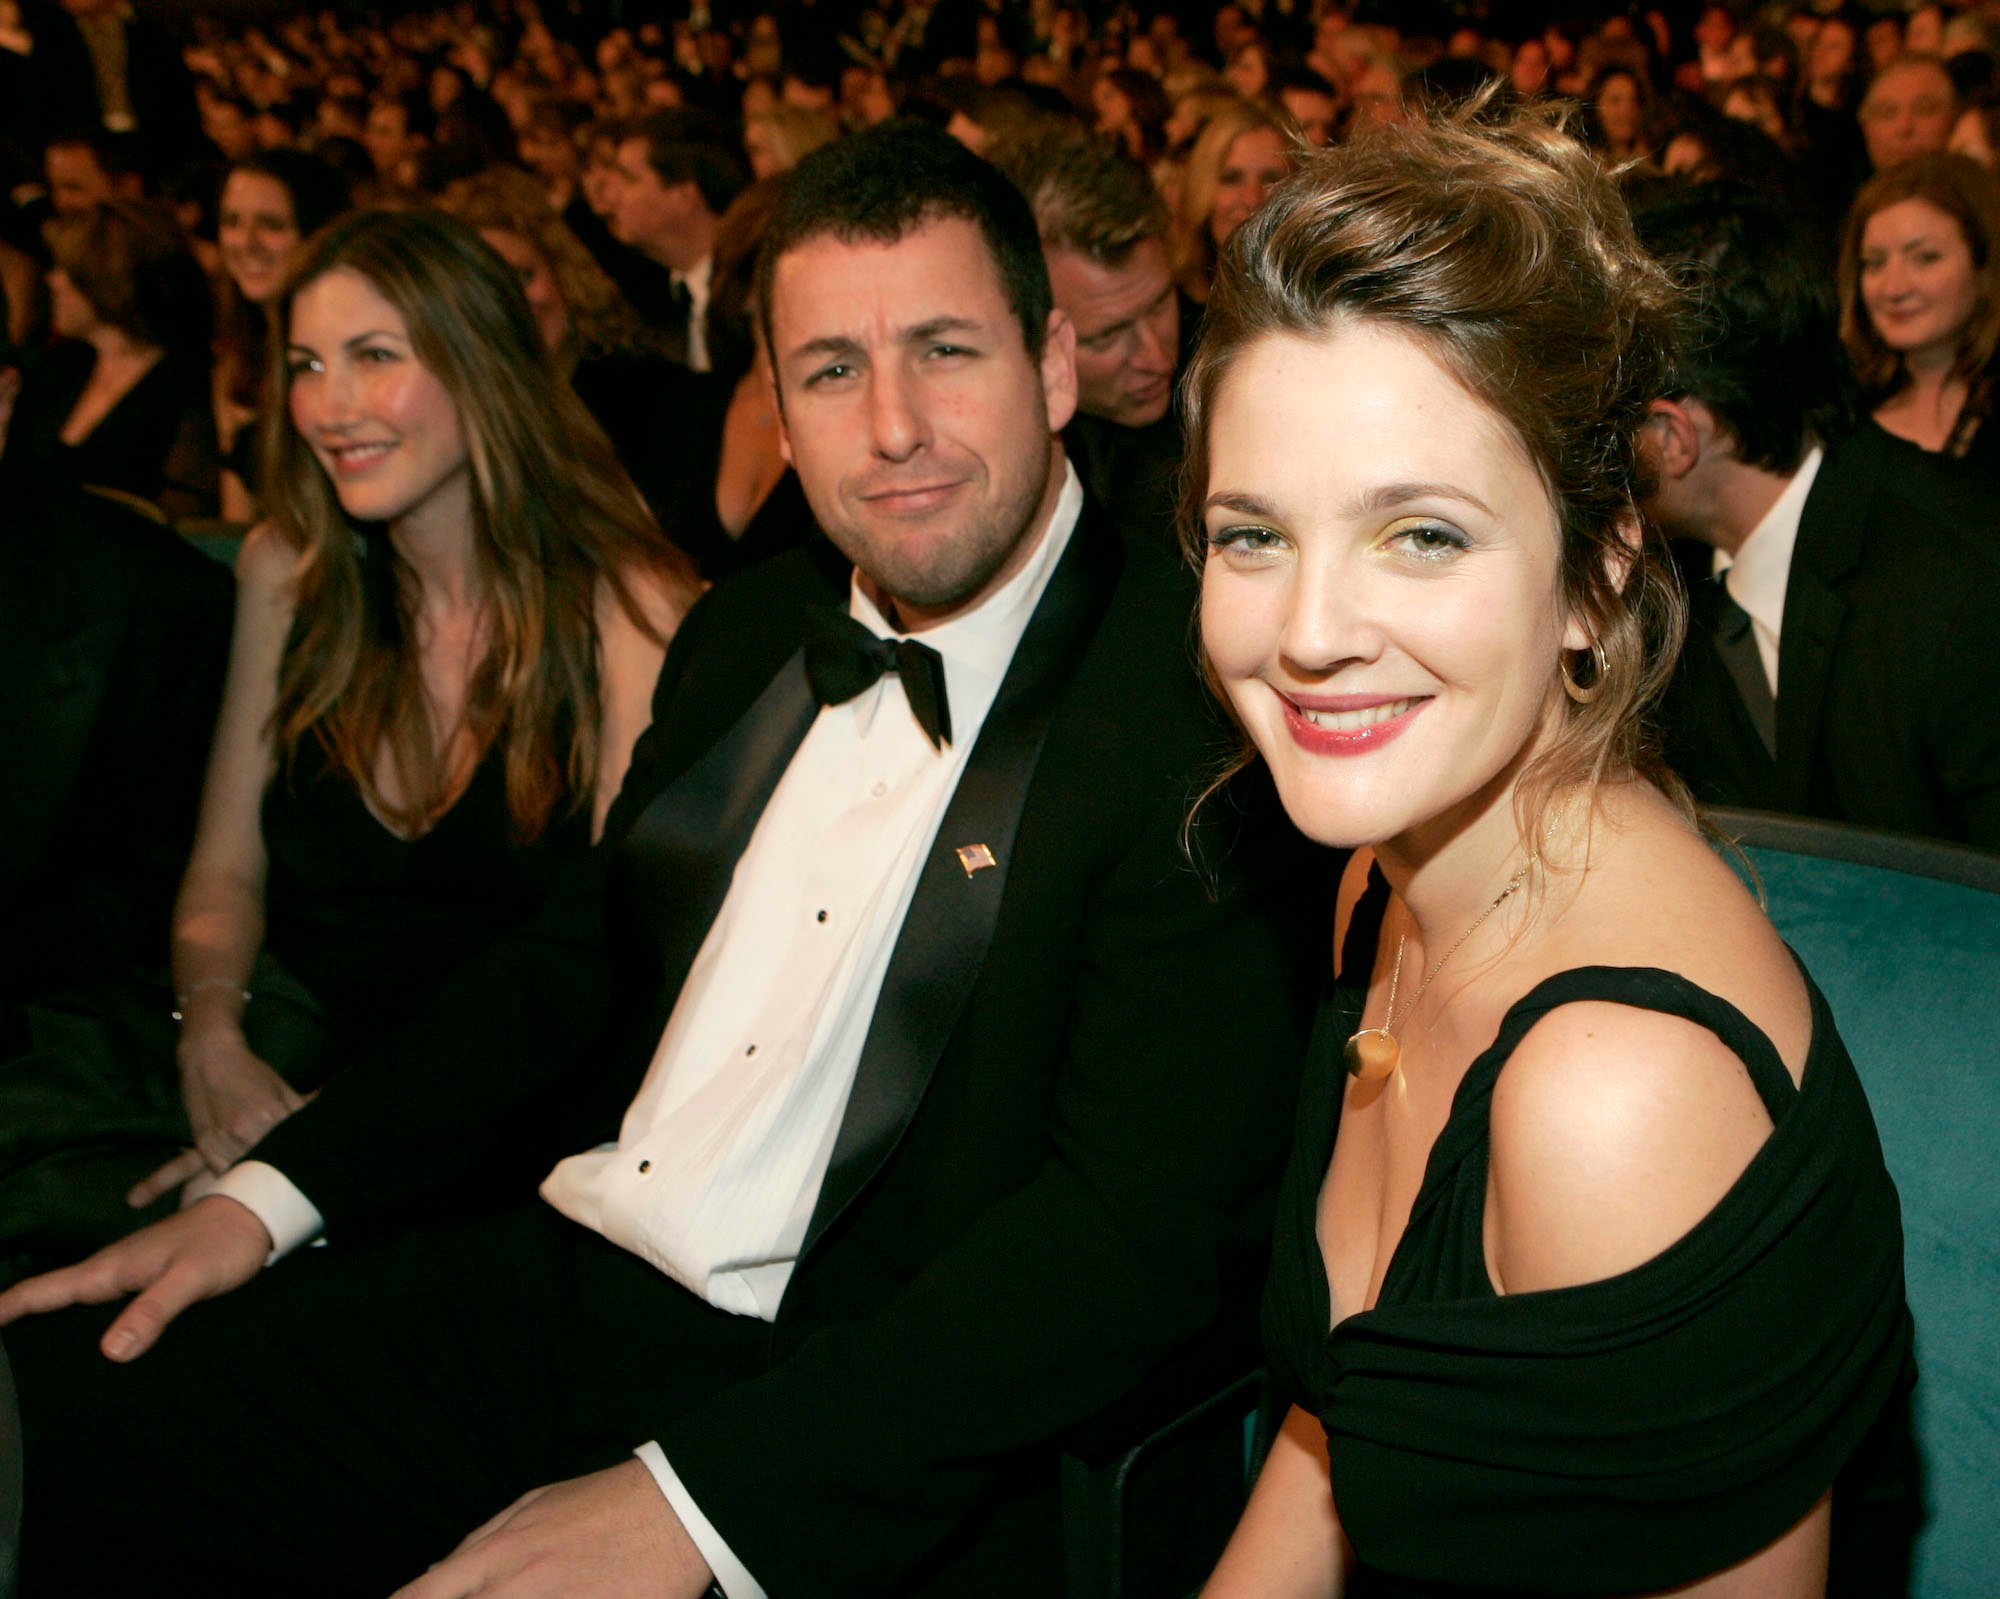 (L-R) Adam Sandler and Drew Barrymore smiling at the camera